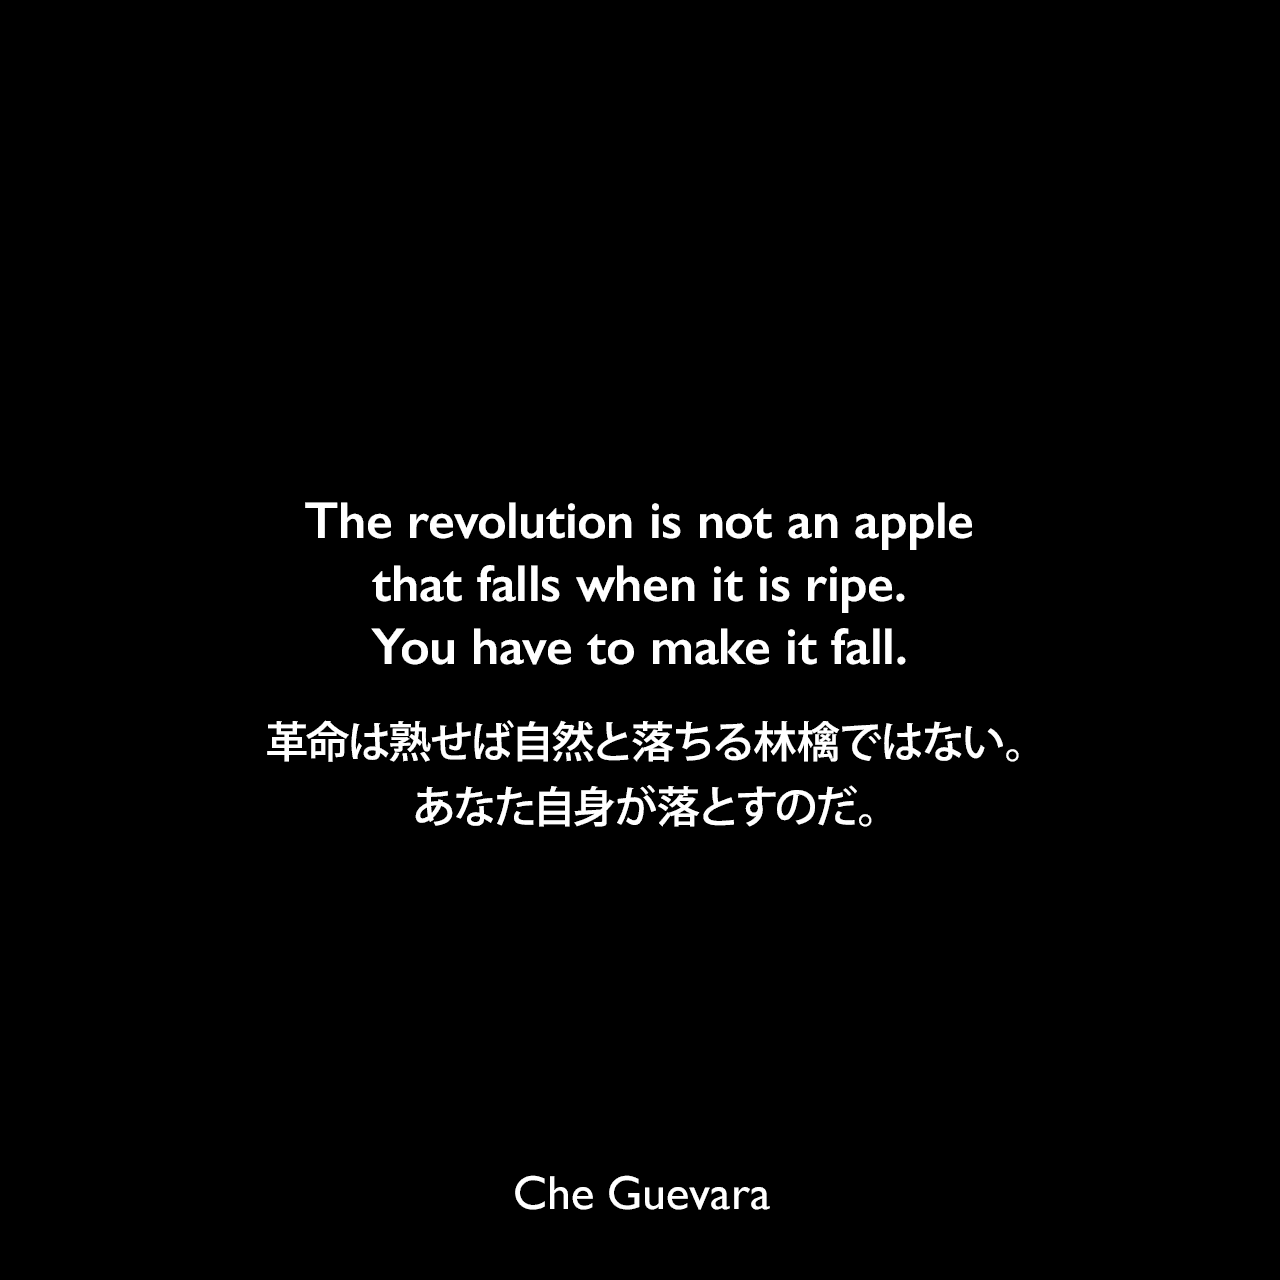 The revolution is not an apple that falls when it is ripe. You have to make it fall.革命は熟せば自然と落ちる林檎ではない。あなた自身が落とすのだ。- チェ・ゲバラによる本「Che Guevara Speaks: Selected Speeches and Writings」よりChe Guevara